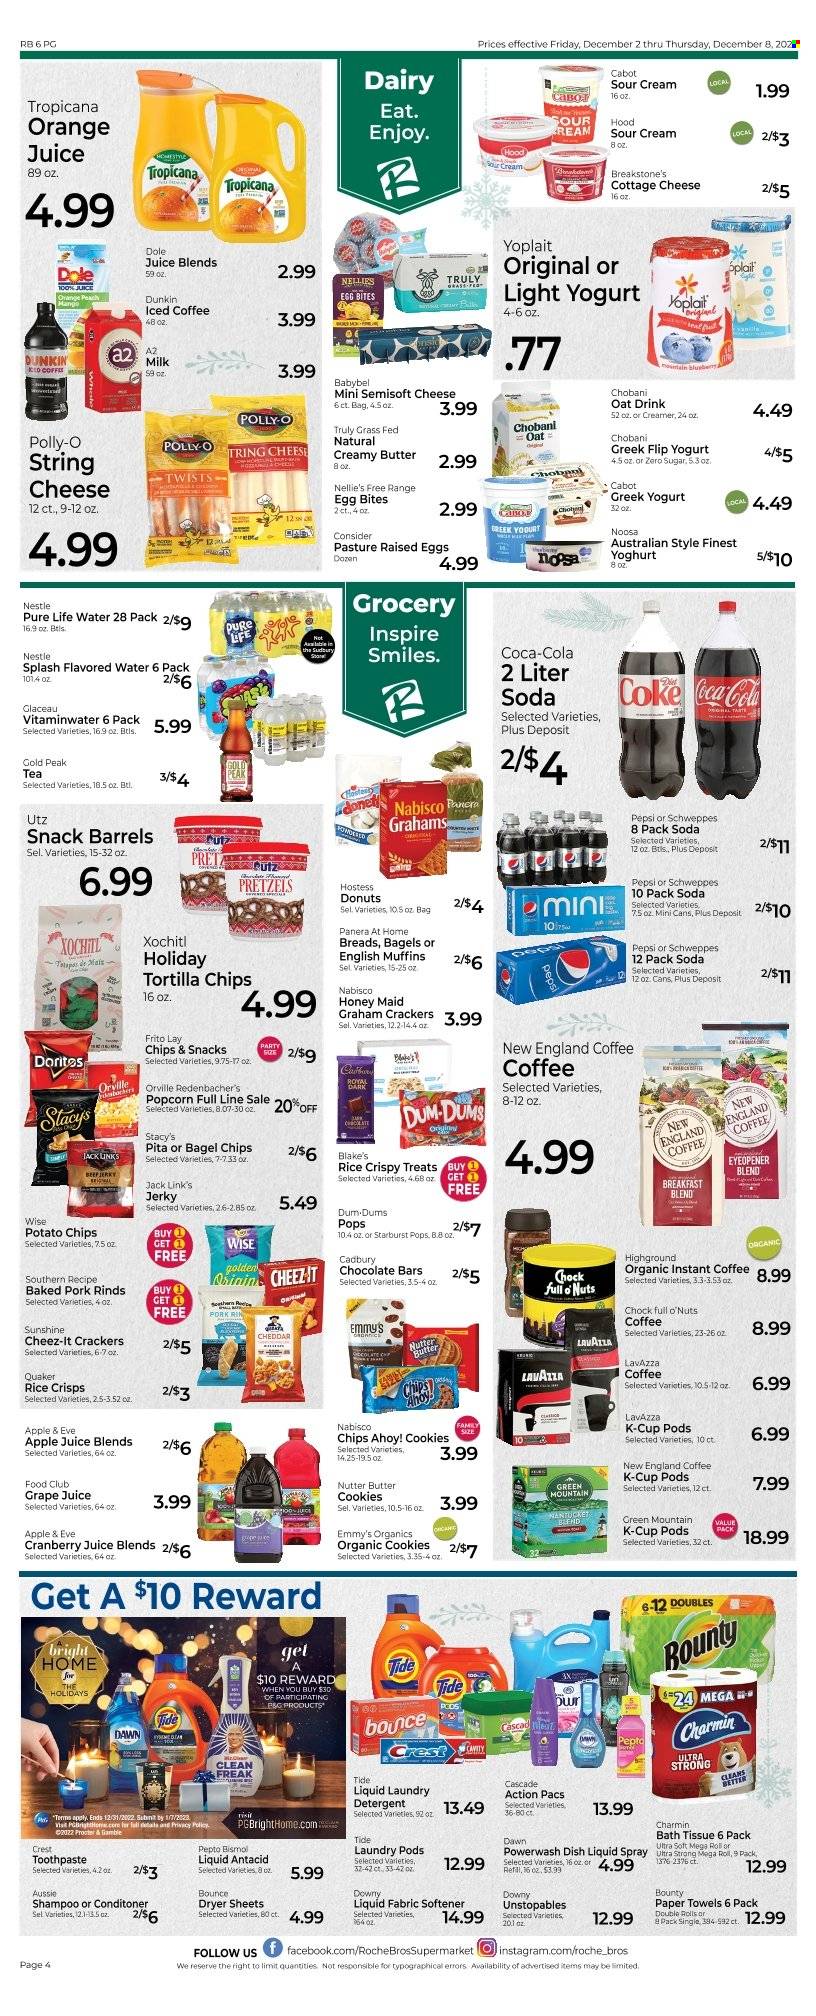 thumbnail - Roche Bros. Flyer - 12/02/2022 - 12/08/2022 - Sales products - bagels, english muffins, pretzels, donut, Dole, Quaker, beef jerky, jerky, cottage cheese, string cheese, cheese, Babybel, greek yoghurt, yoghurt, Yoplait, Chobani, milk, eggs, Sunshine, sour cream, creamer, cookies, graham crackers, Nestlé, butter cookies, snack, Bounty, crackers, Cadbury, Chips Ahoy!, Starburst, chocolate bar, Doritos, tortilla chips, potato chips, chips, Cheez-It, rice crisps, Jack Link's, Honey Maid, apple juice, Coca-Cola, cranberry juice, Schweppes, Pepsi, orange juice, juice, Gold Peak Tea, flavored water, soda, Pure Life Water, iced coffee, tea, instant coffee, coffee capsules, K-Cups, Lavazza, breakfast blend, Green Mountain, TRULY, bath tissue, kitchen towels, paper towels, Charmin, detergent, Cascade, Tide, Unstopables, fabric softener, laundry detergent, Bounce, dryer sheets, Downy Laundry, dishwashing liquid, shampoo, toothpaste, Crest, Aussie, Antacid. Page 5.